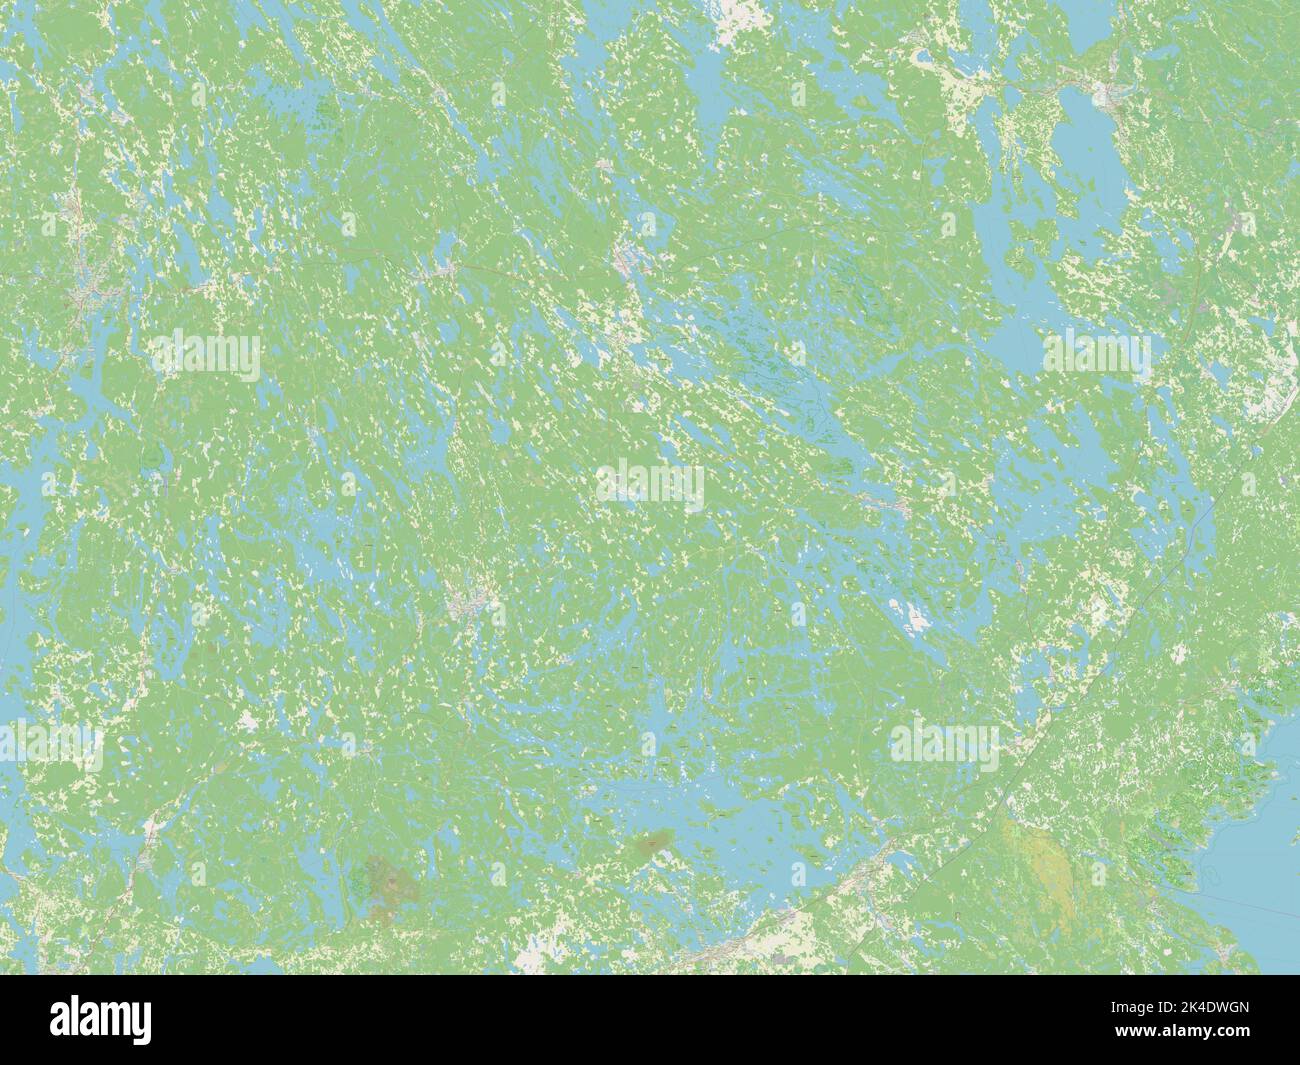 Southern Savonia, region of Finland. Open Street Map Stock Photo